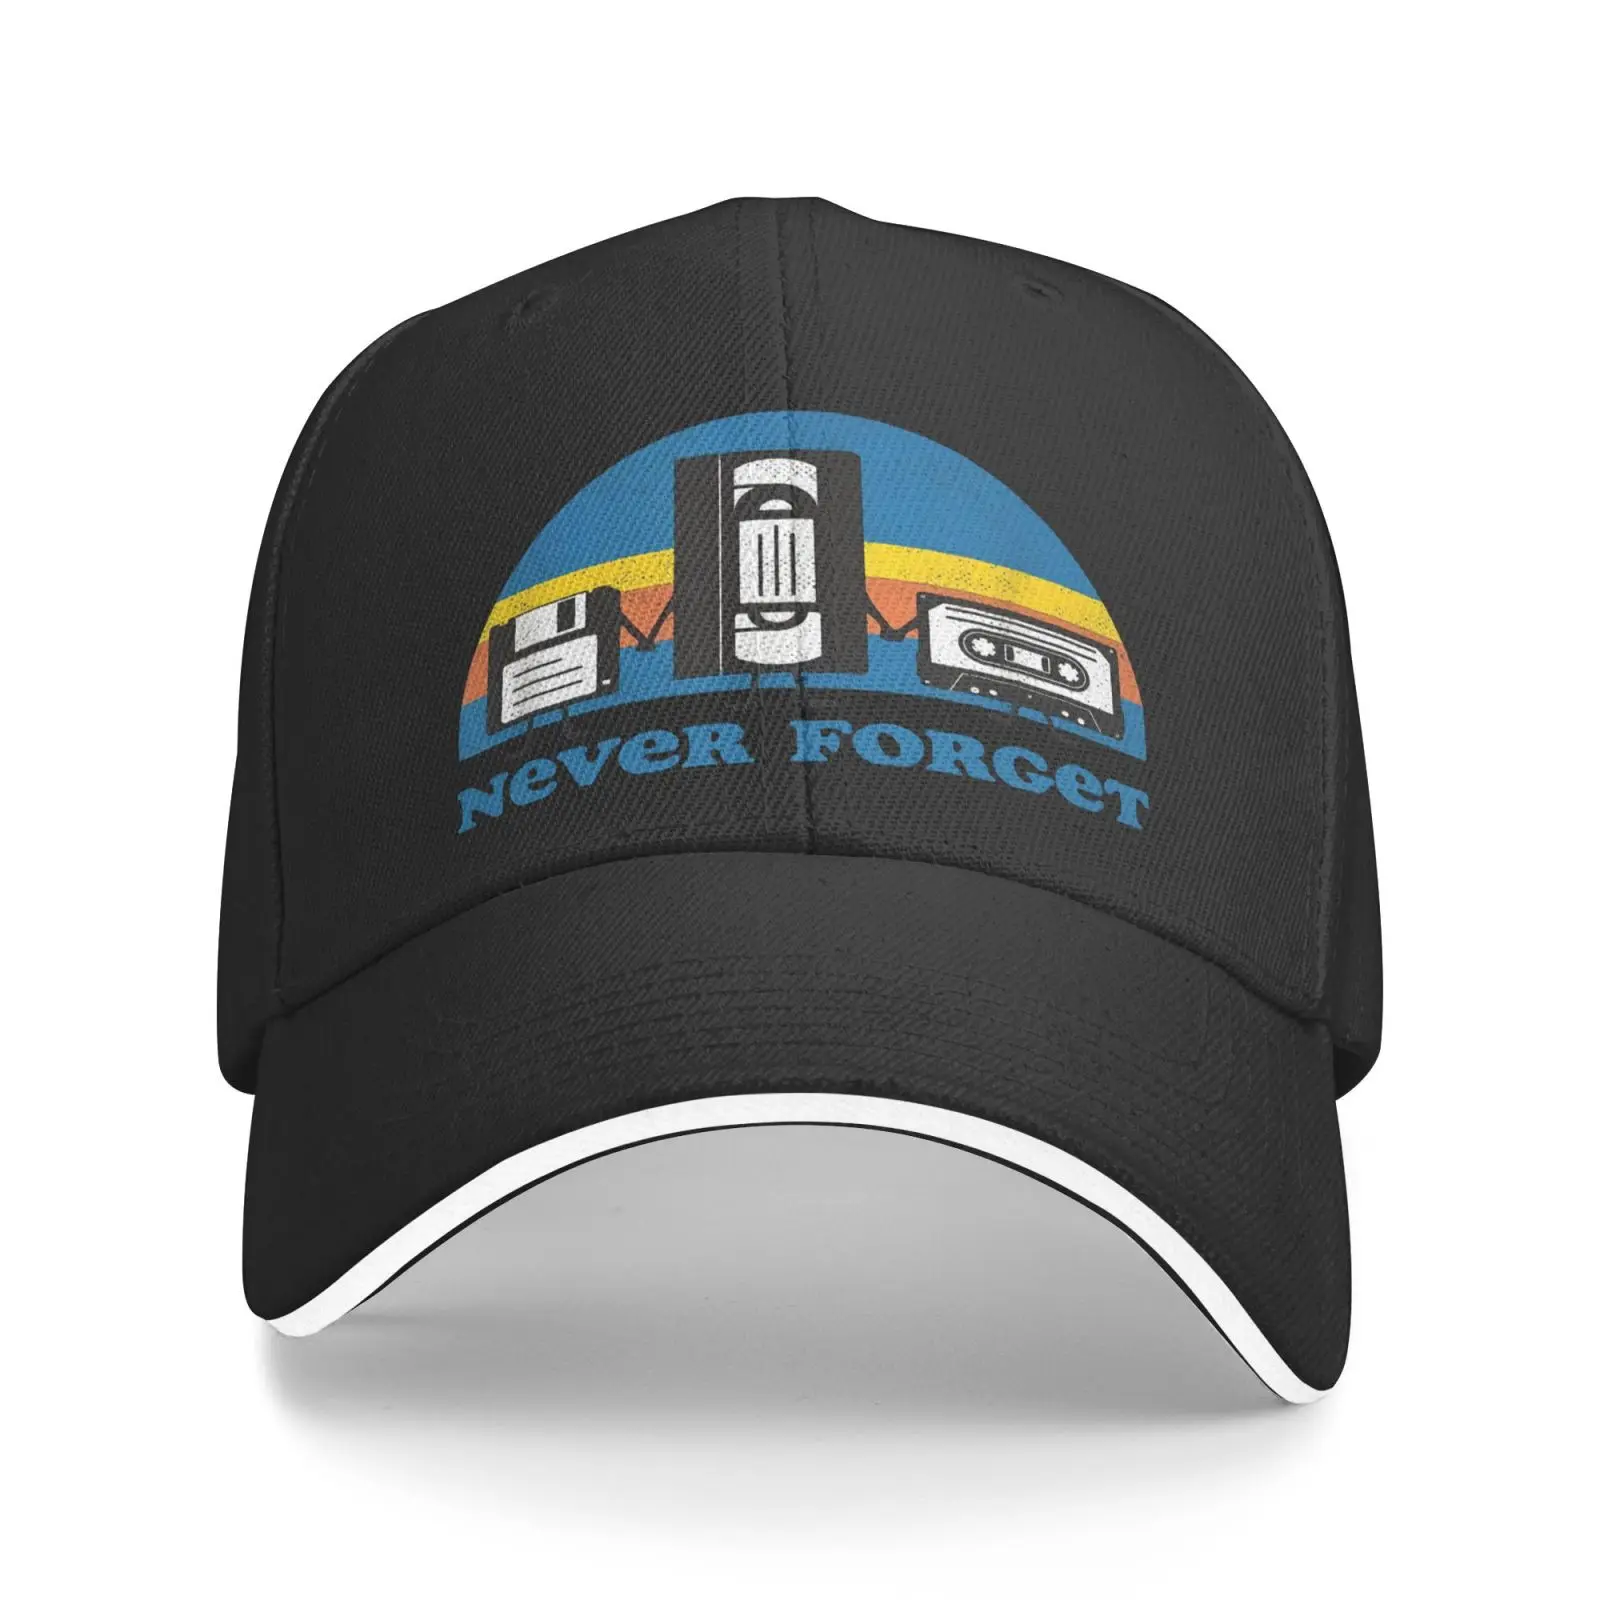 

Never Forget Floppy Disk Vhs Tape Cap Hat Male Women's Caps Cap Female Cap Male Women's Hats Hats For Girls Caps Hip Hop Hats